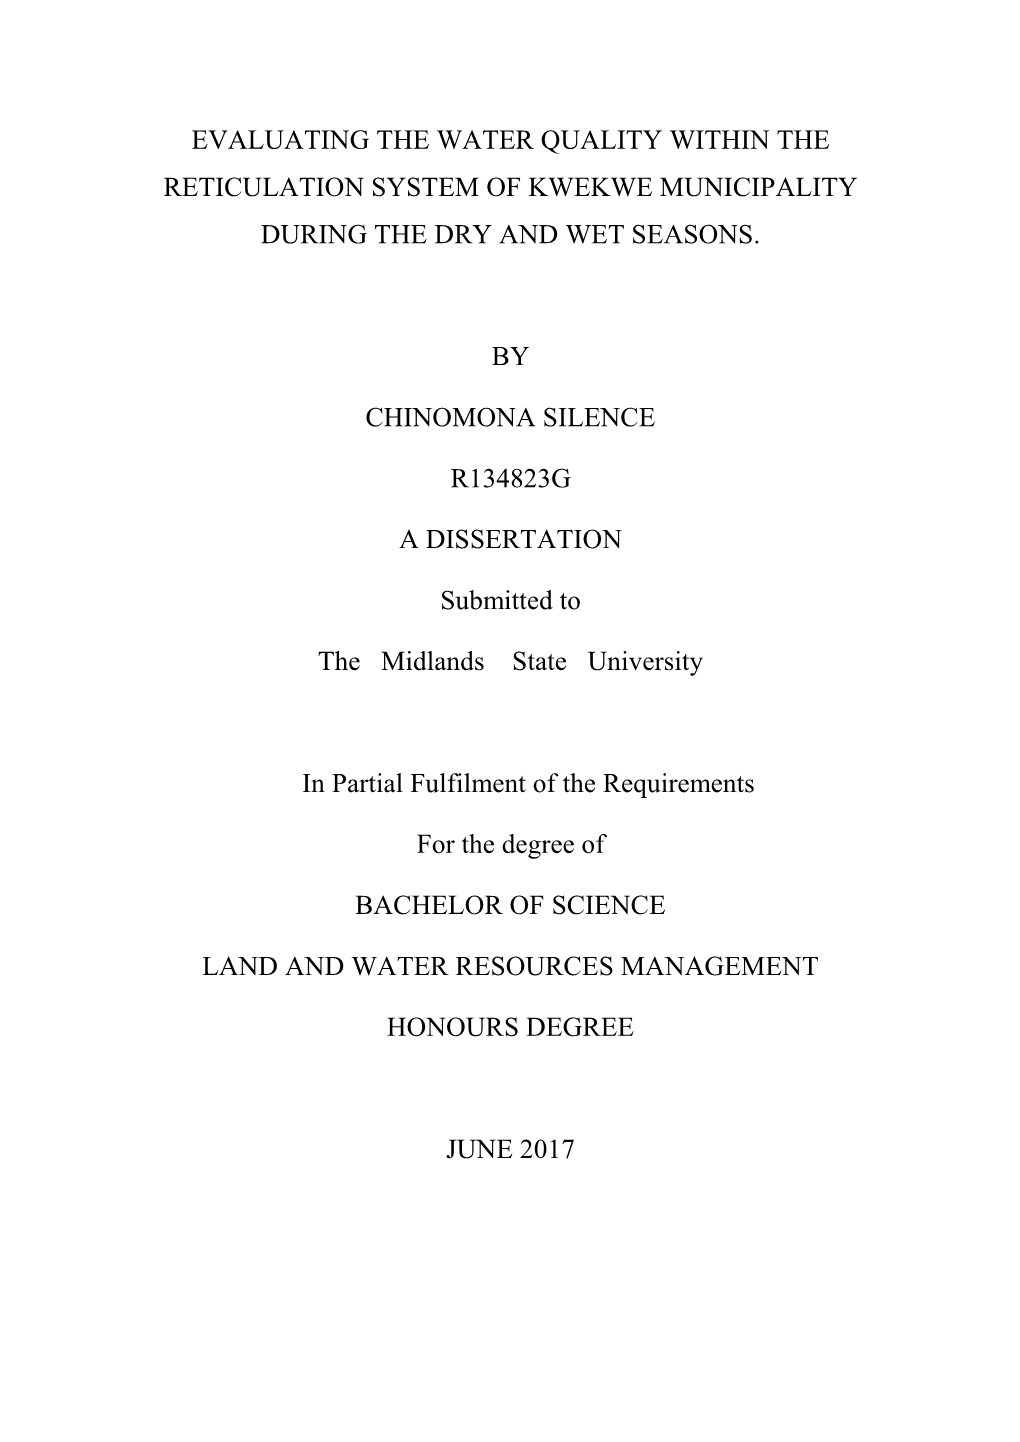 Evaluating the Water Quality Within the Reticulation System of Kwekwe Municipality During the Dry and Wet Seasons